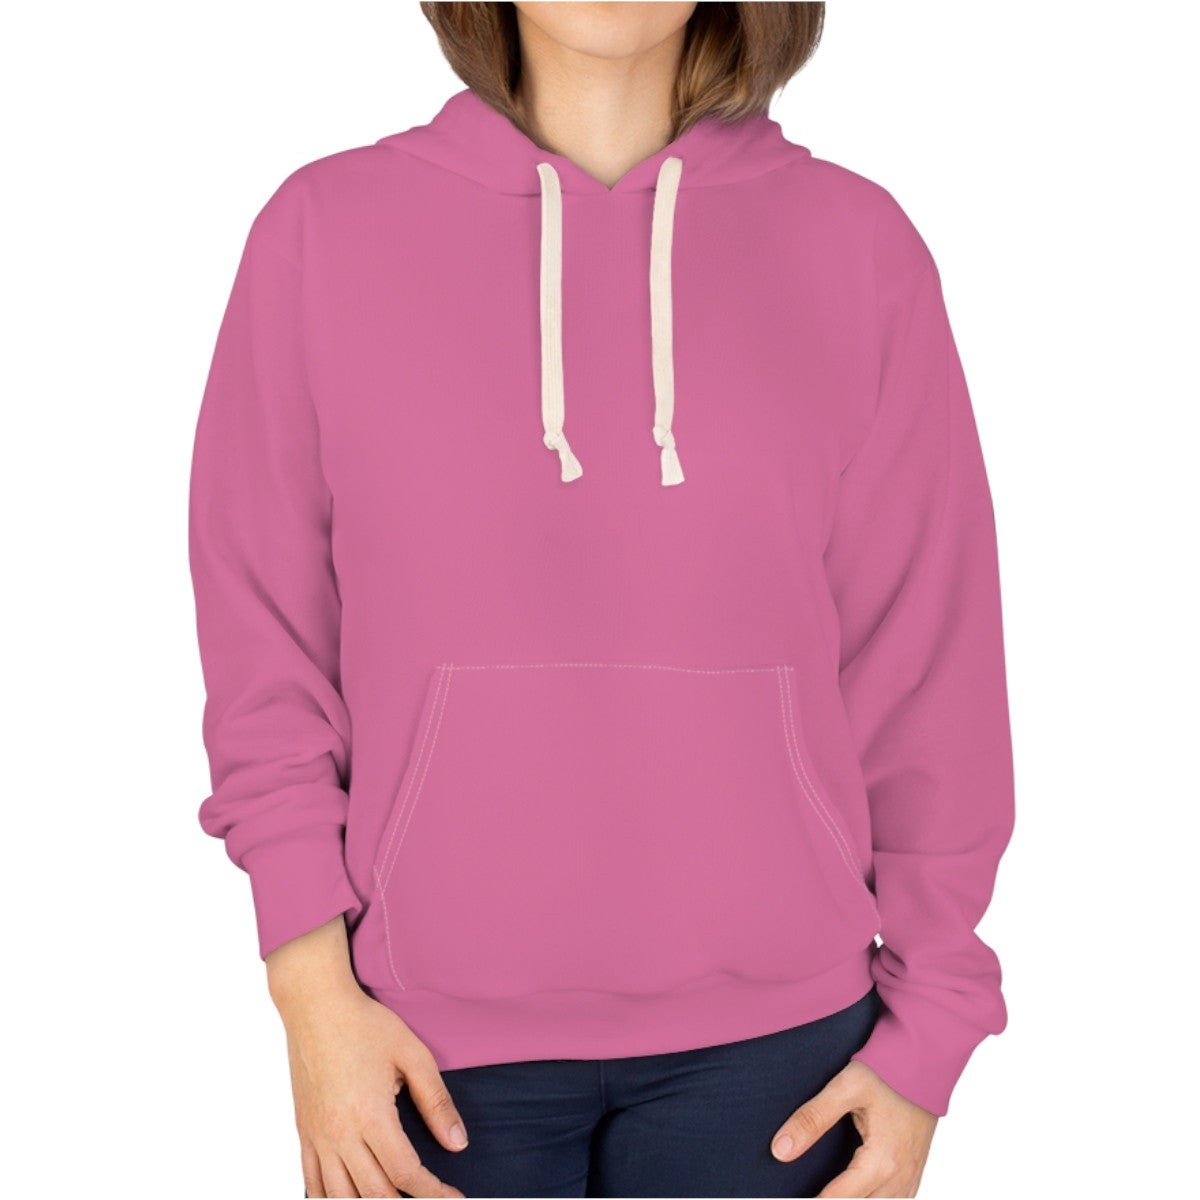 Solid Hot Pink Unisex Pullover Hoodie